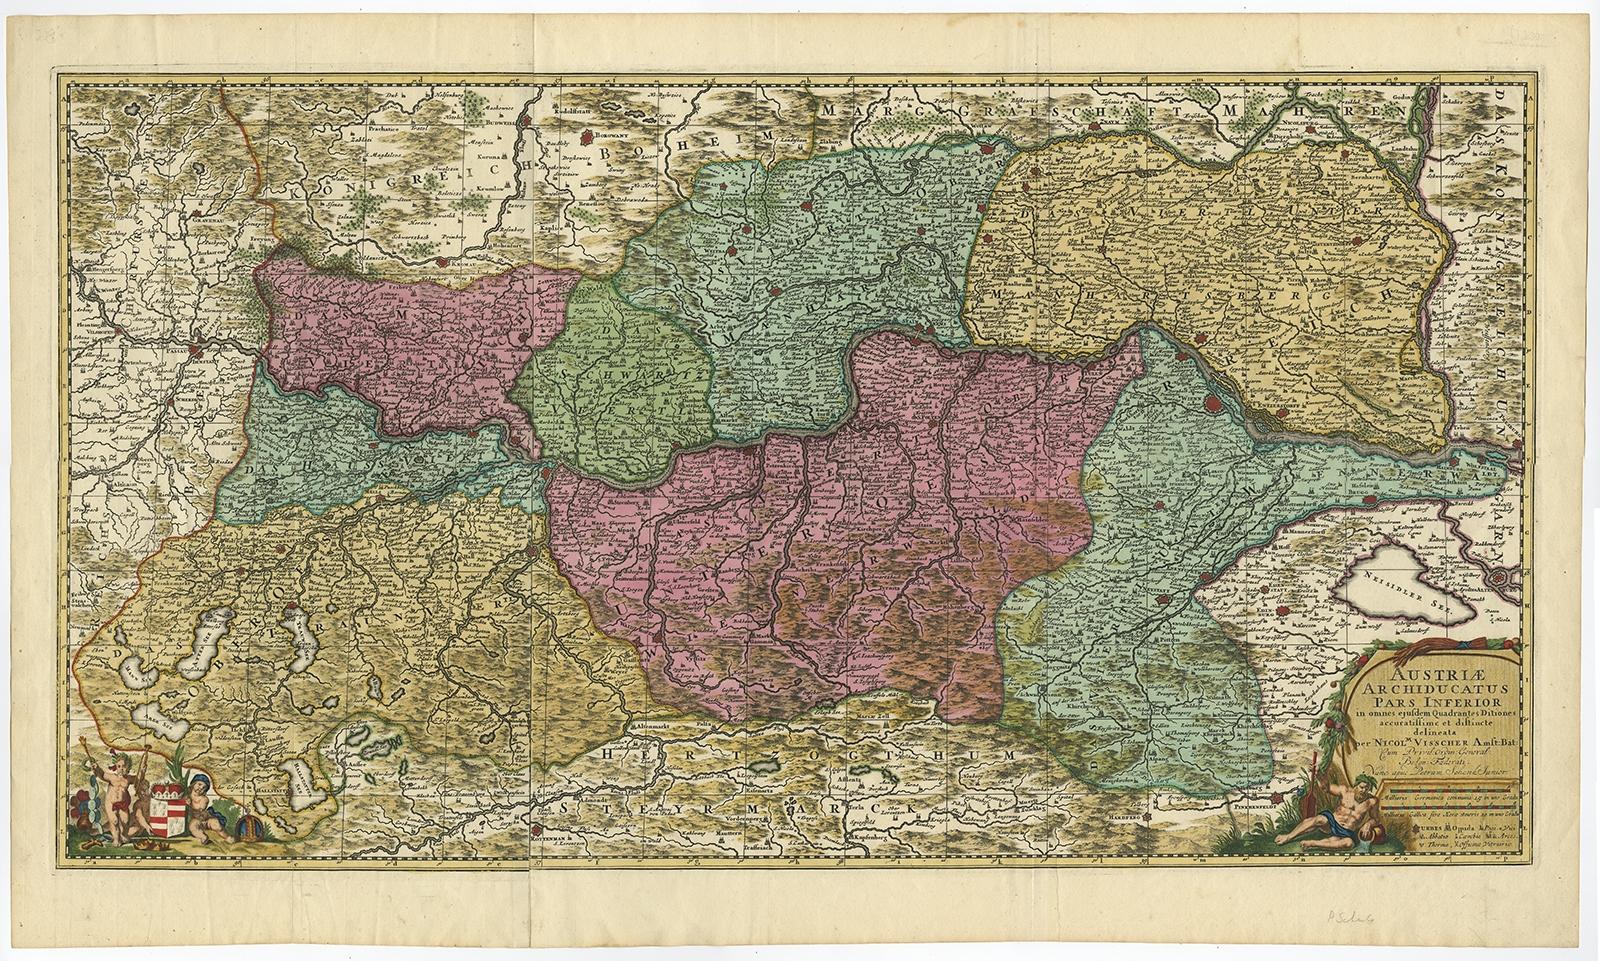 Antique map titled 'Austriae Archiducatus pars superior in omnes ejusdem (..).' 

Spectacular large map of Upper and Lower Austria between Passau and Wien with figurative cartouche and armorial vignette. Printed on two sheets and joined. Published